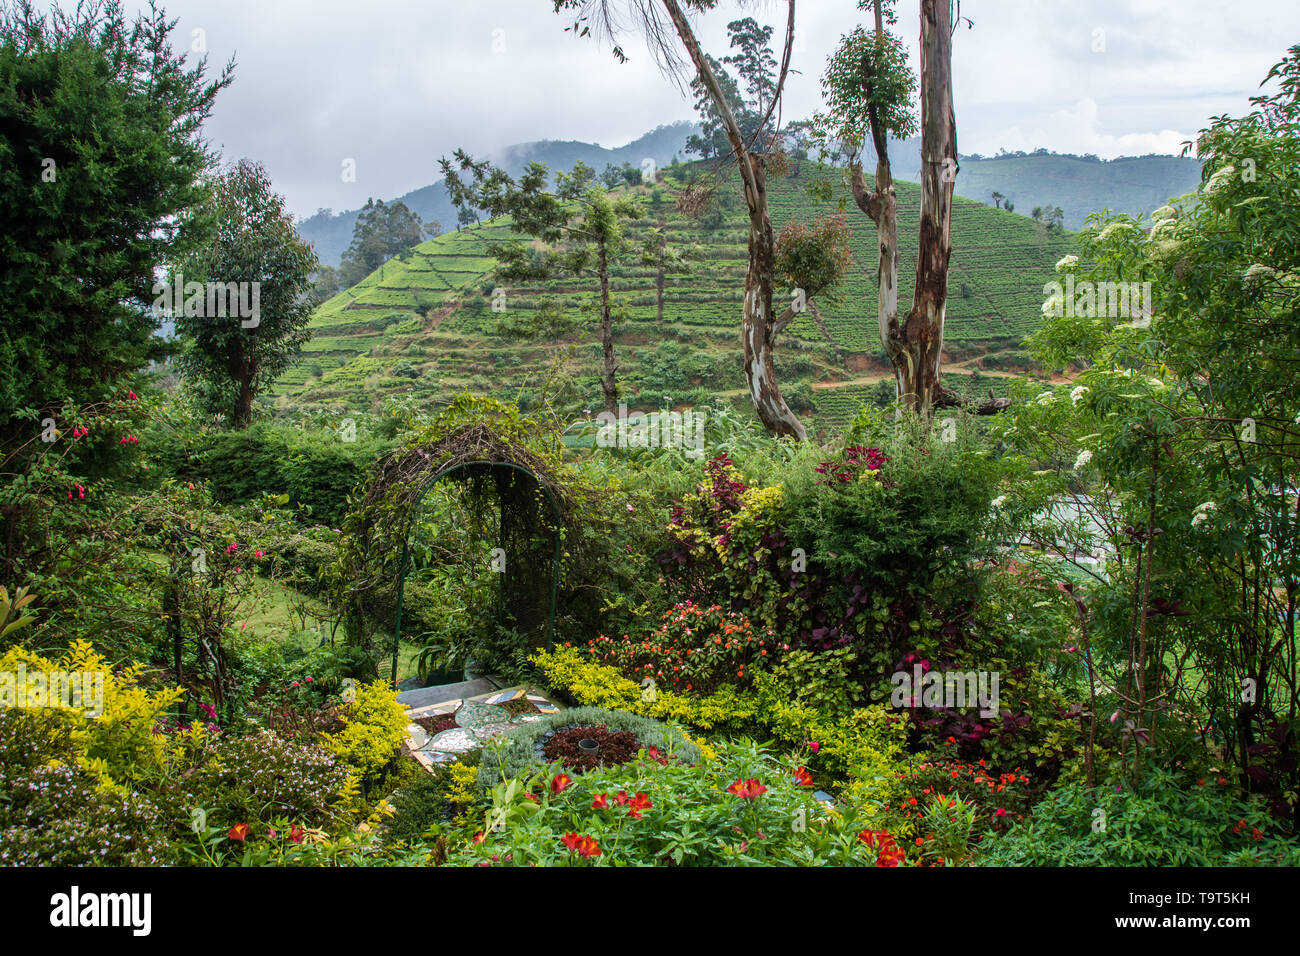 Sri Lanka trip, day 8: a view of tea terraces from the garden of the Heritance Tea Factory Hotel. Stock Photo